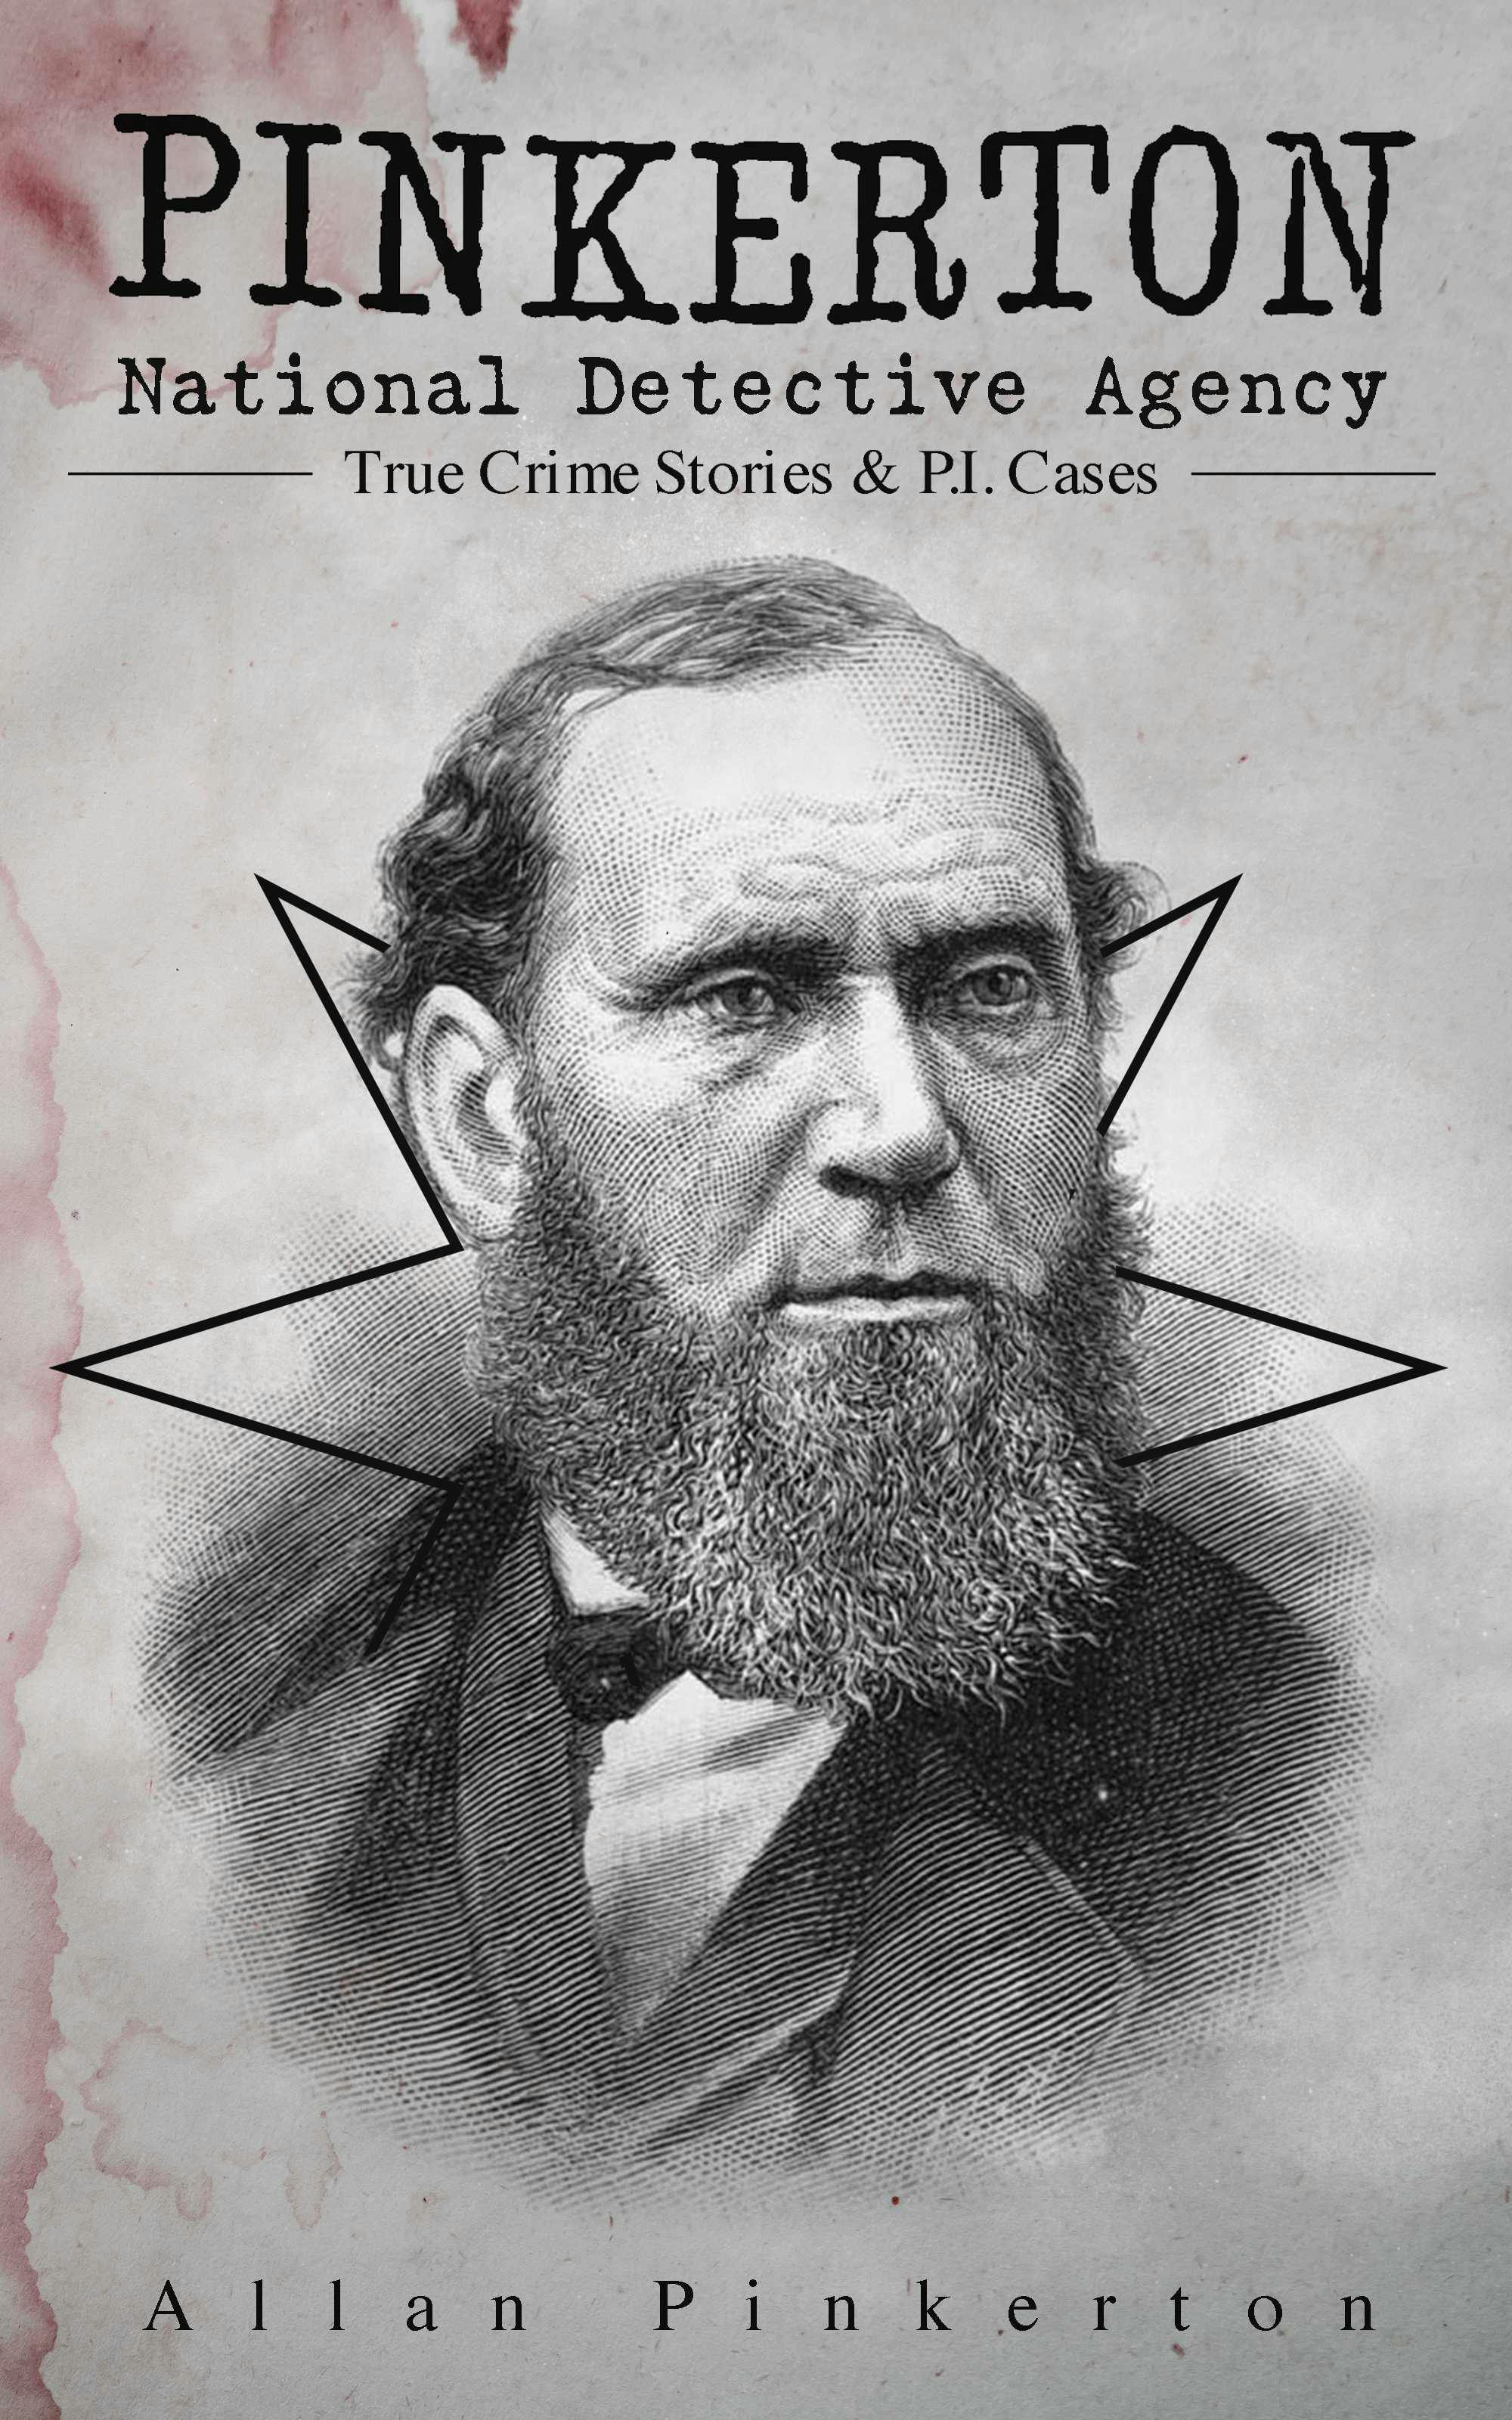 Pinkerton National Detective Agency: True Crime Stories & P.I. Cases: The Expressman and the Detective, The Somnambulist and the Detective, The Murderer and the Fortune Teller, Poisoner and the Detectives, Bucholz and the Detectives, Don Pedro and the Detectives… - Allan Pinkerton